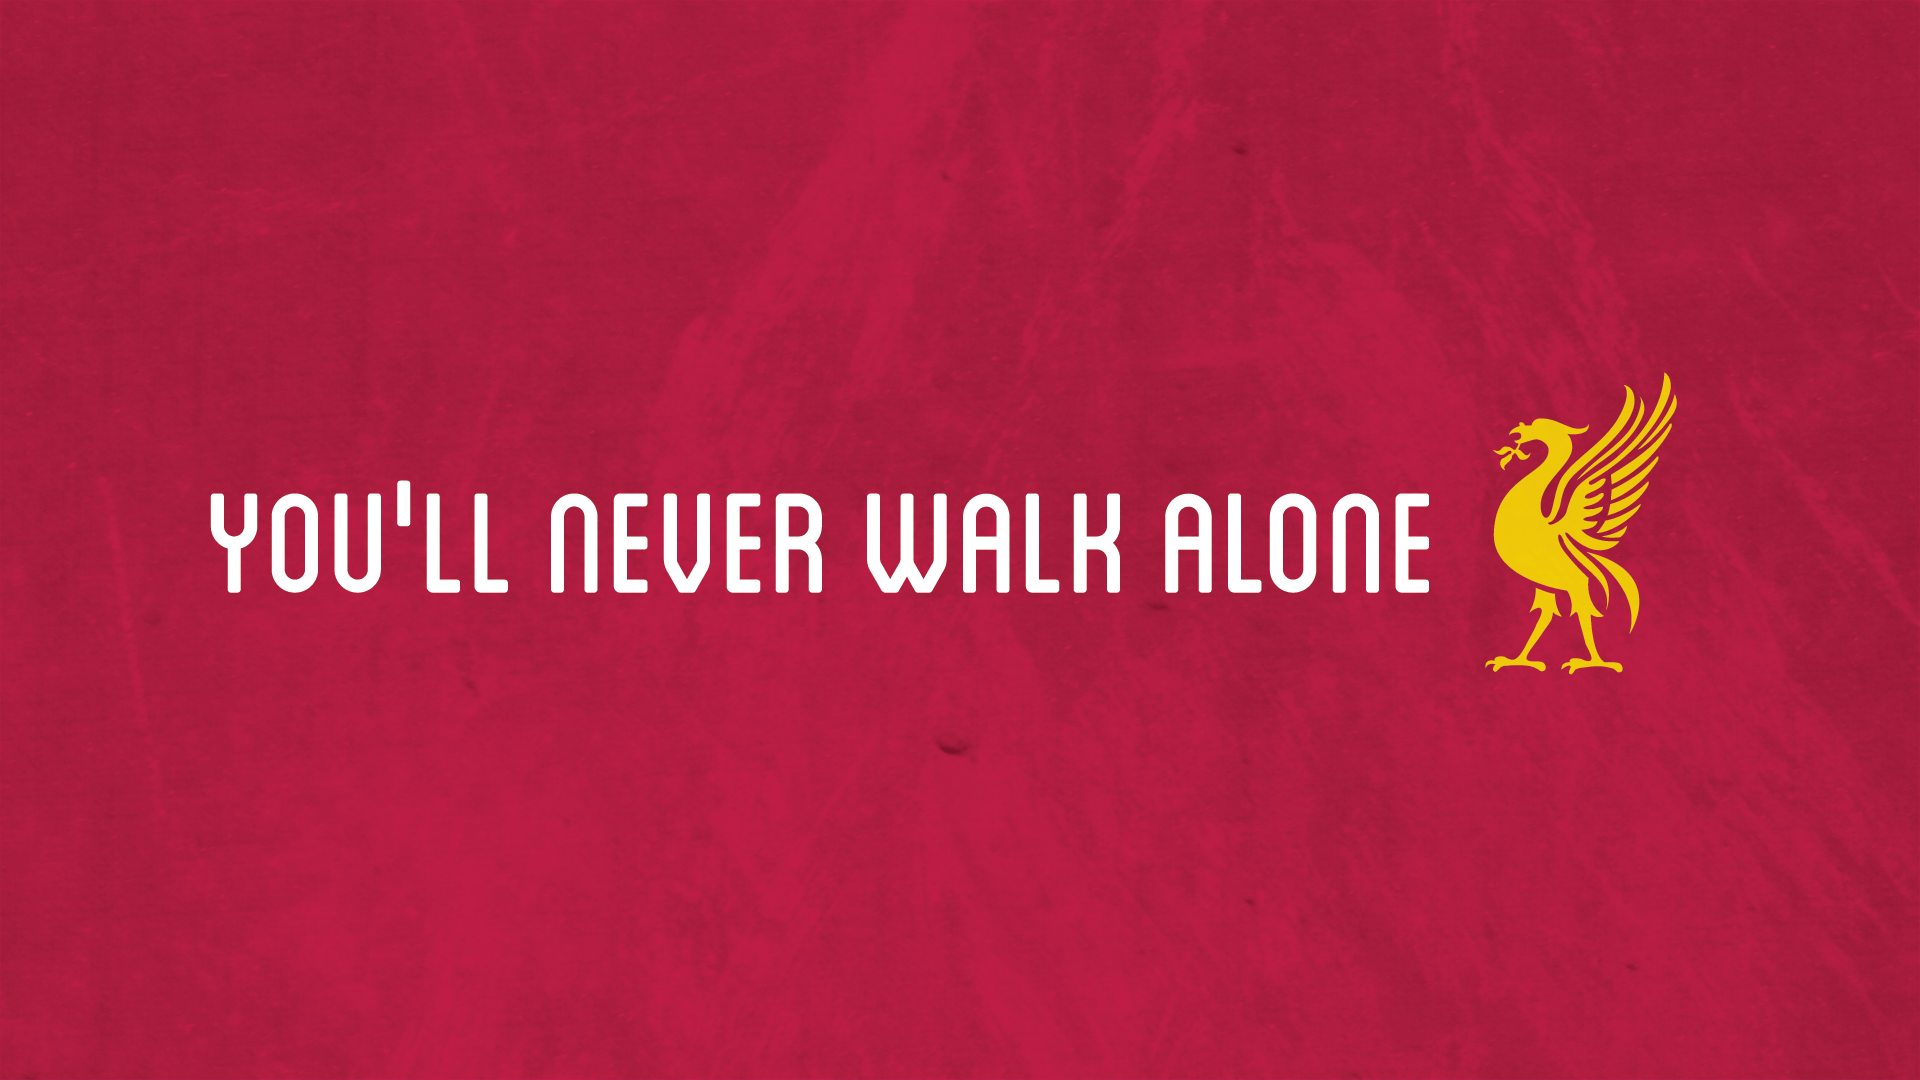 Liverpool Wallpapers 2017